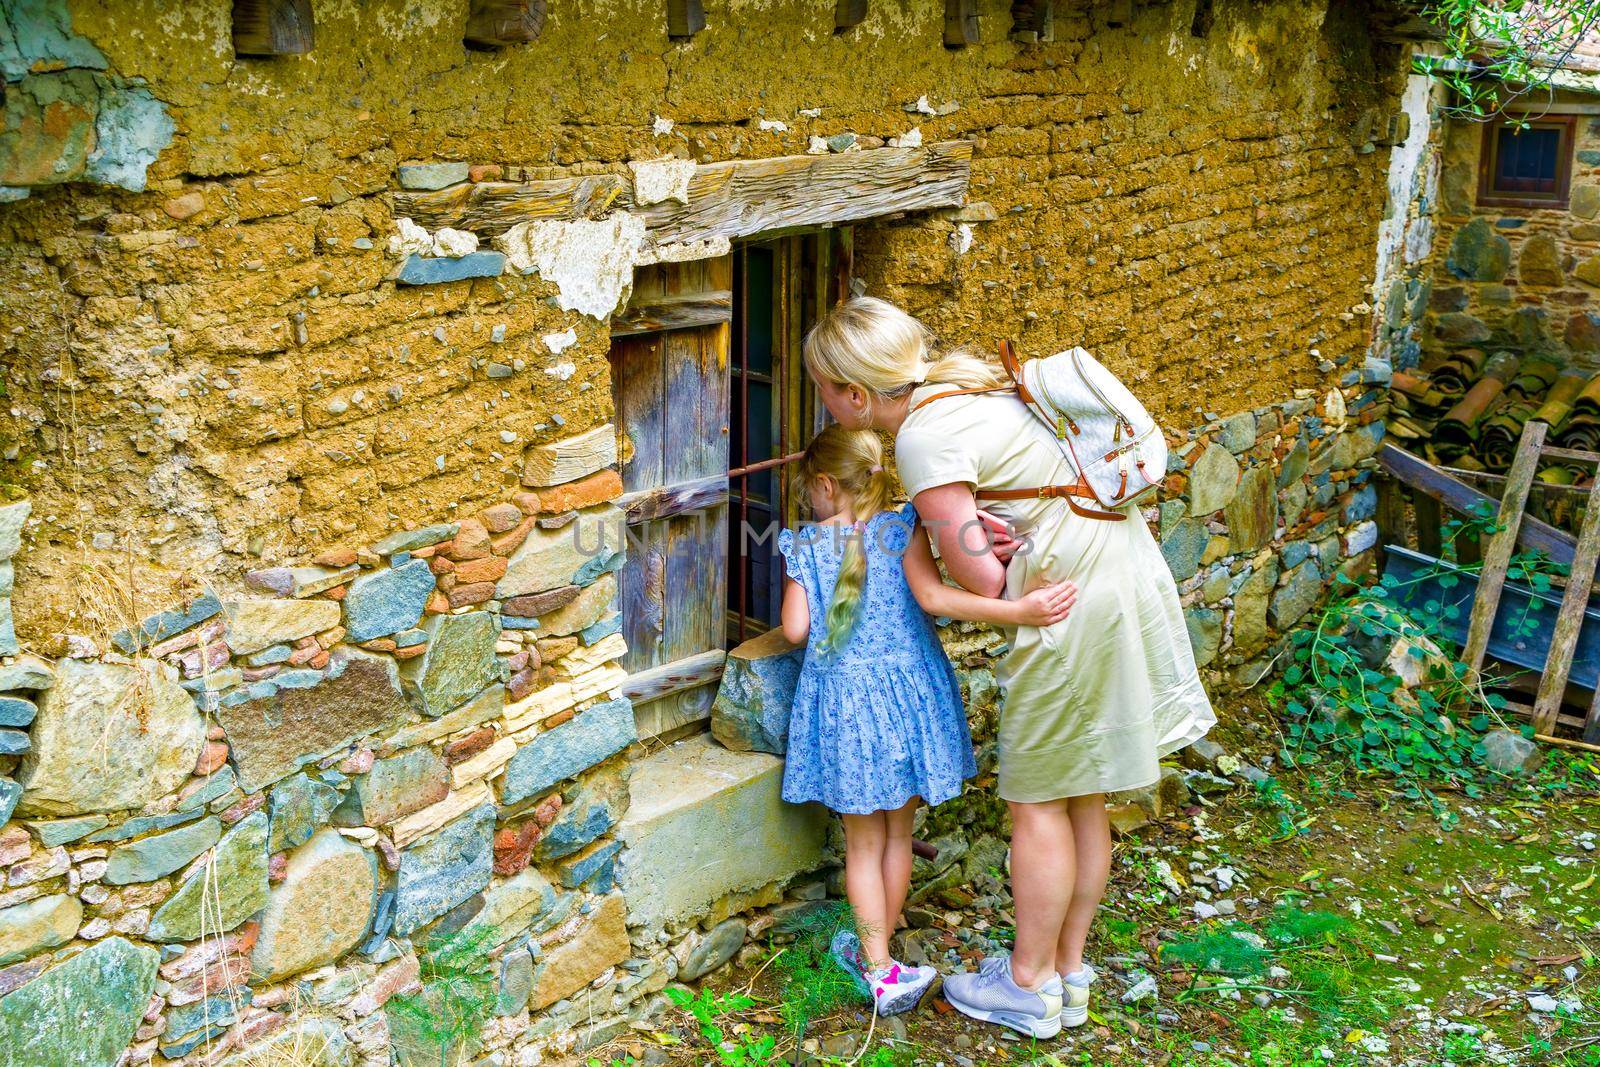 Mom and little daughter look with interest into the window of the old house.Ancient Stone Wall Made of Natural Rough Stones. by kolesnikov_studio